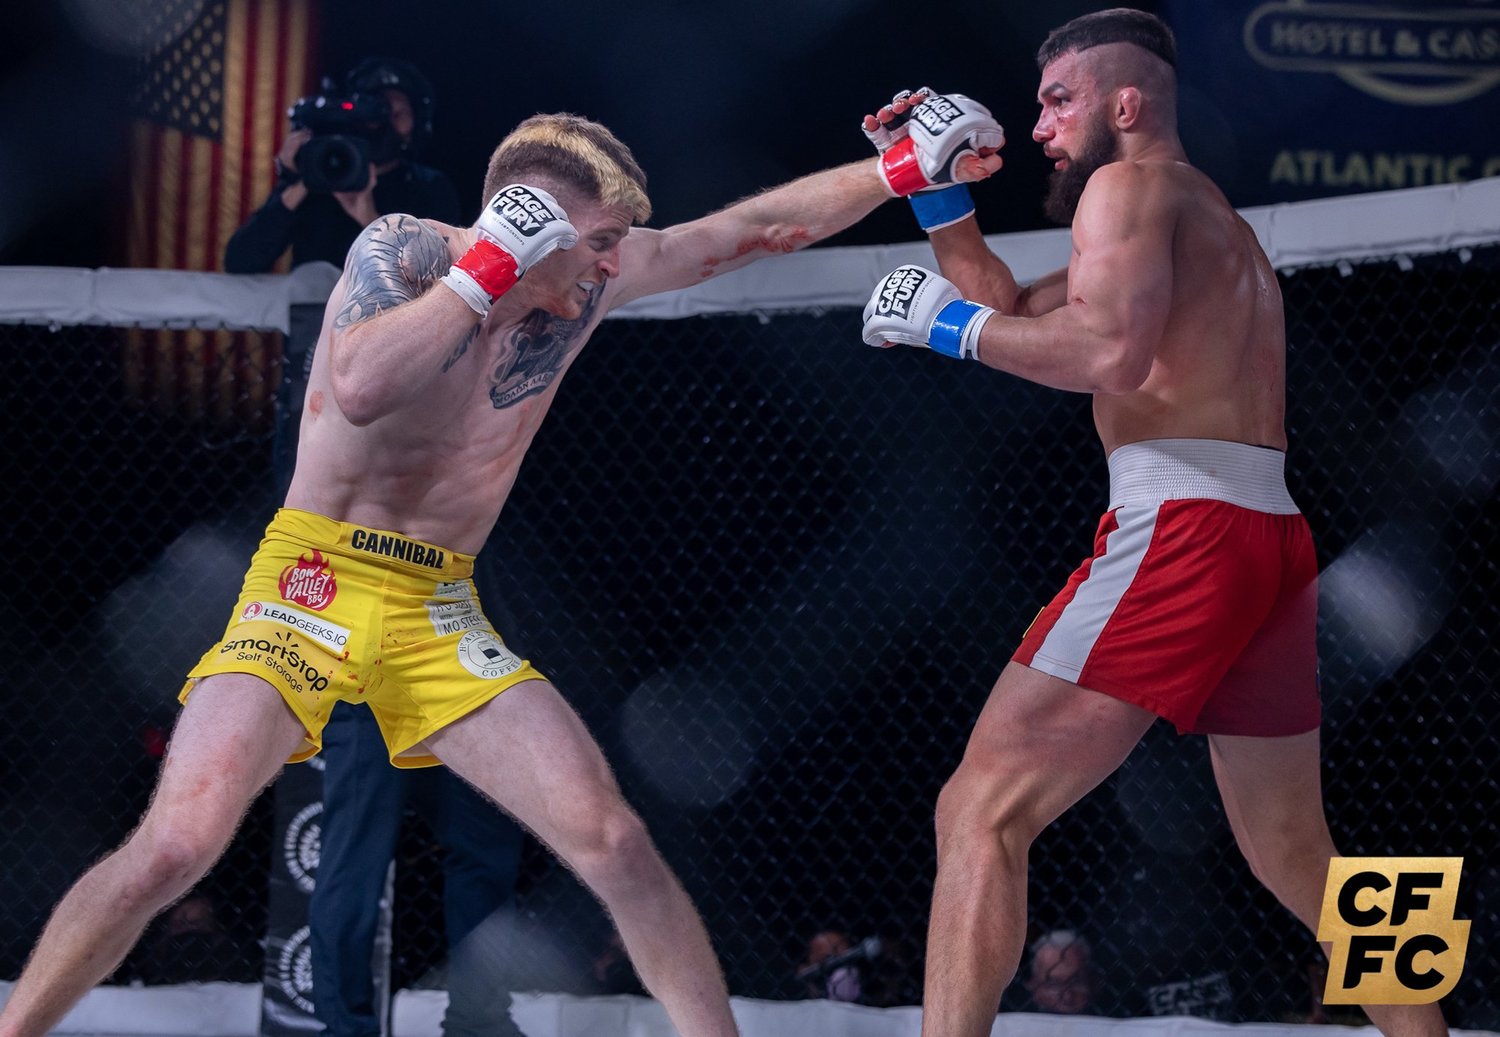 East Rockaway resident Charlie “The Cannibal” Campbell defeated Vadim Ogar by knockout at the Cage Fury Fighting Championships 104 in Atlantic City on Dec. 17.